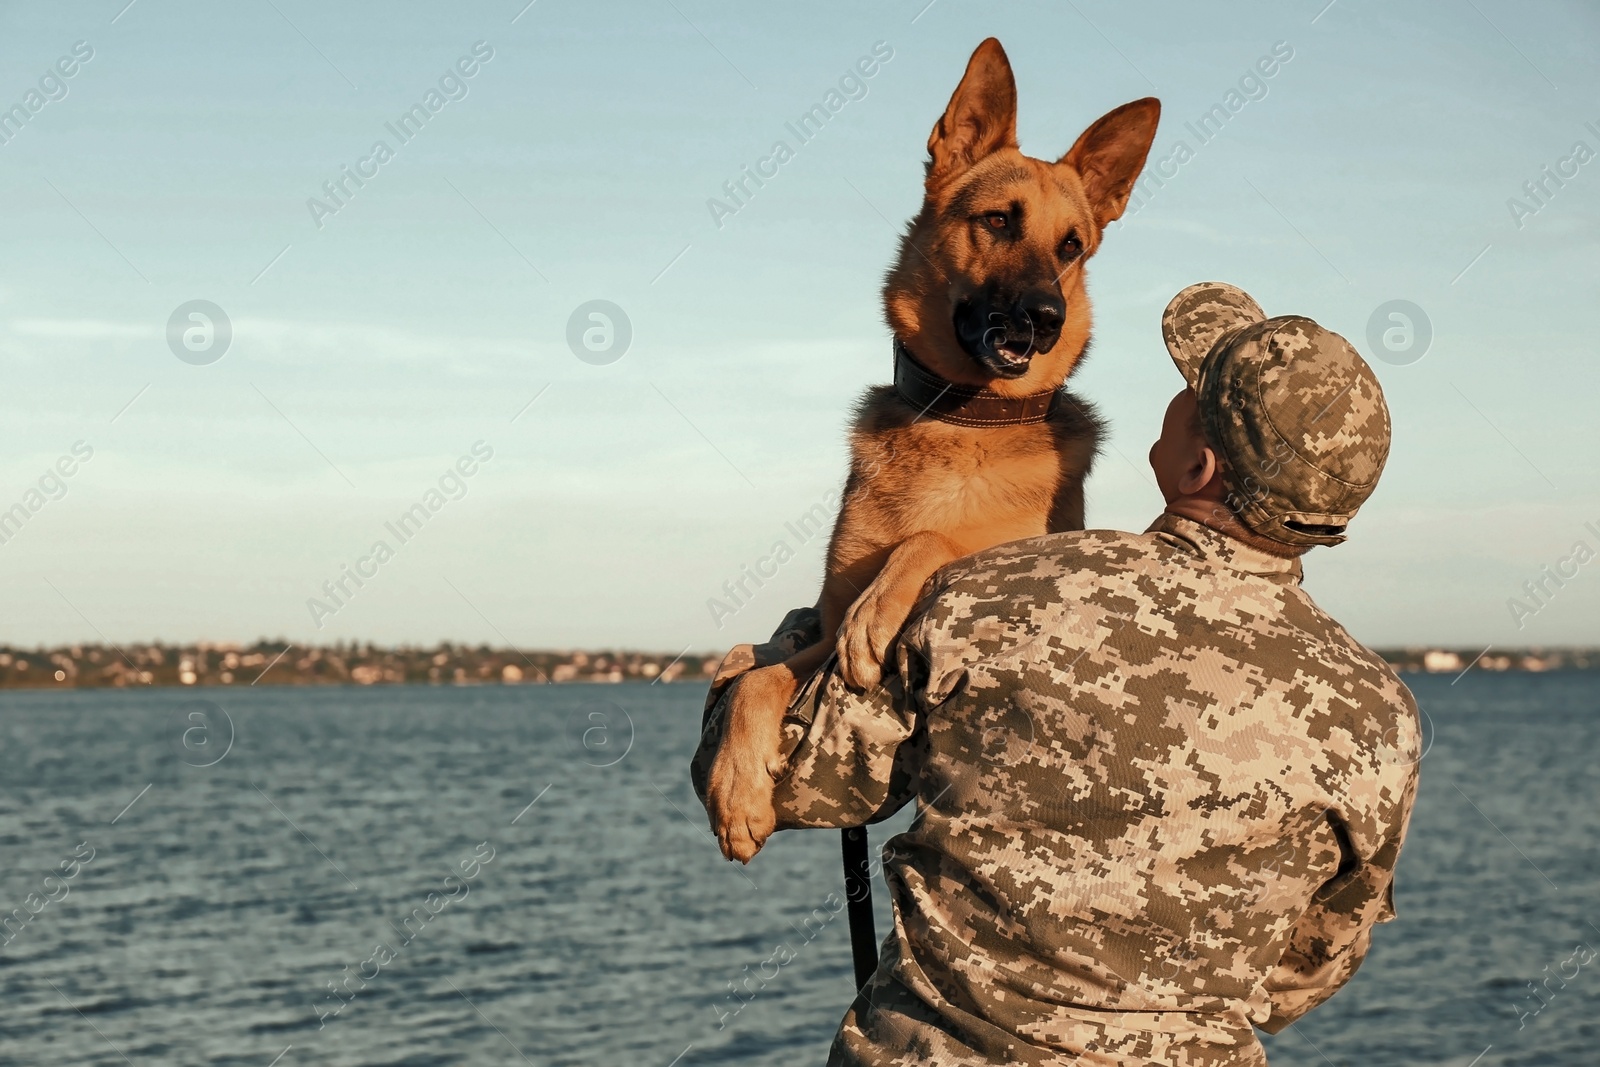 Image of Man in military uniform with German shepherd dog outdoors